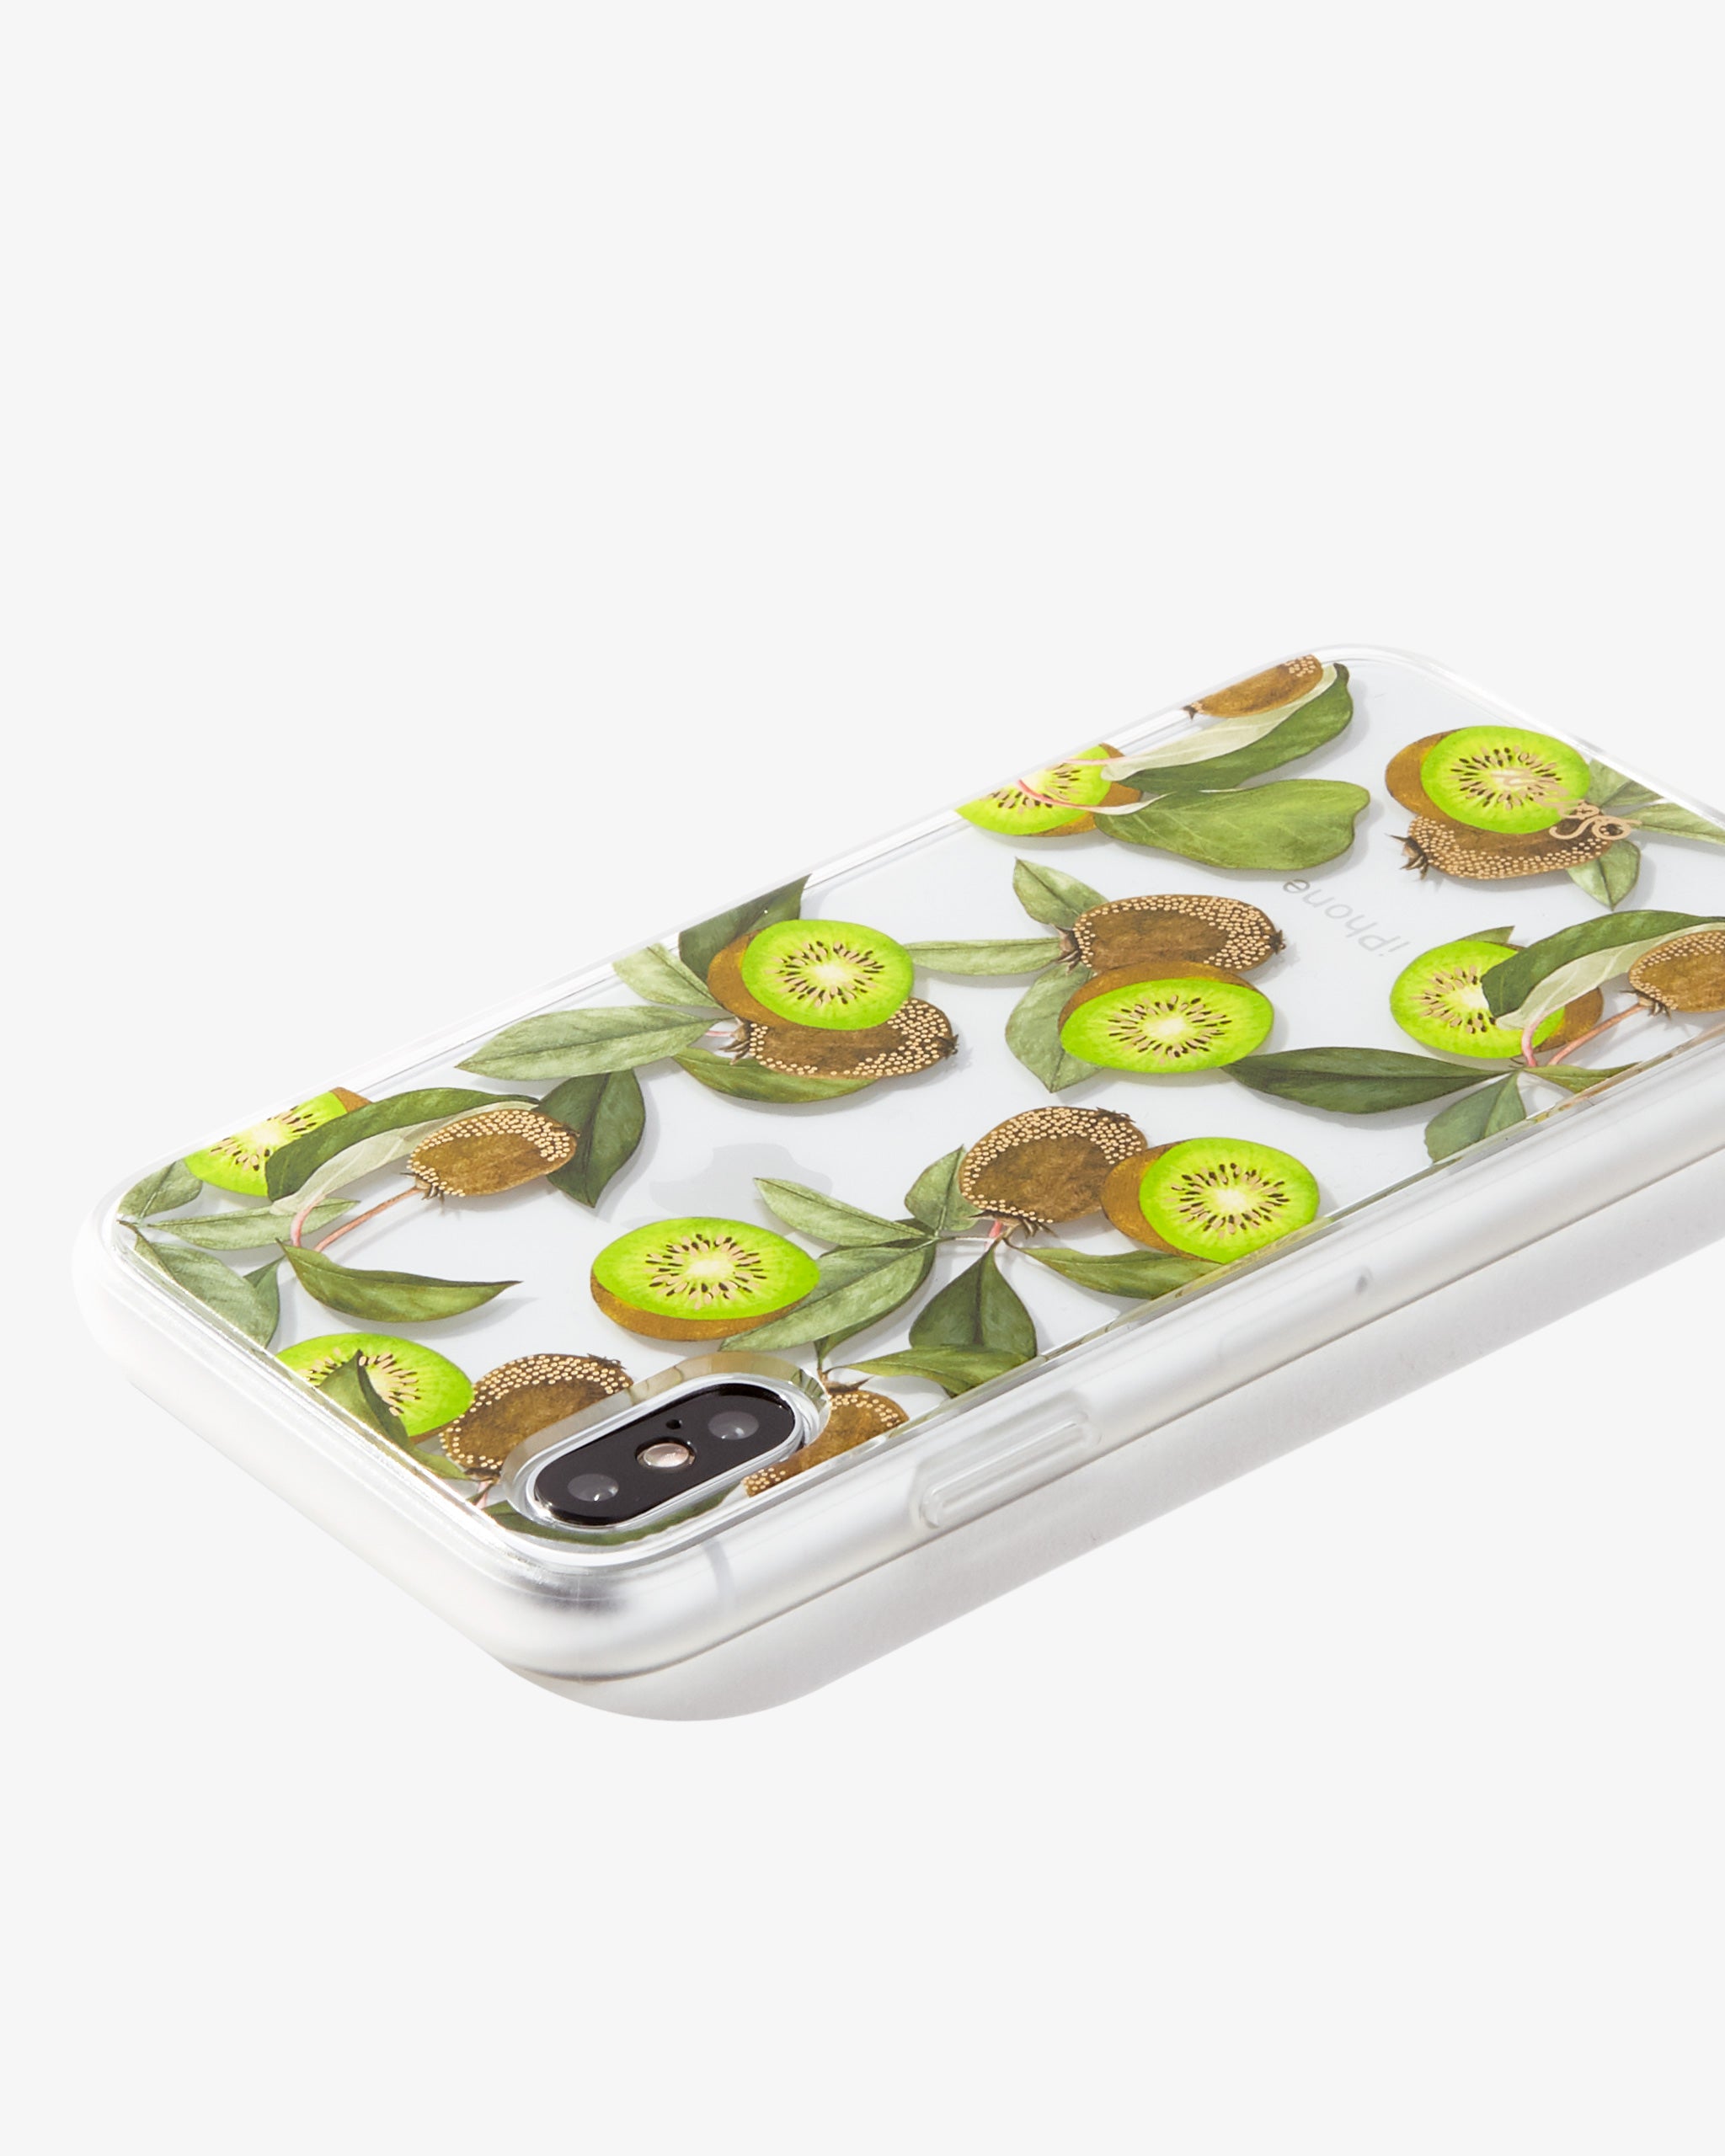 kiwis on a clear case shown on an iphone xs side view